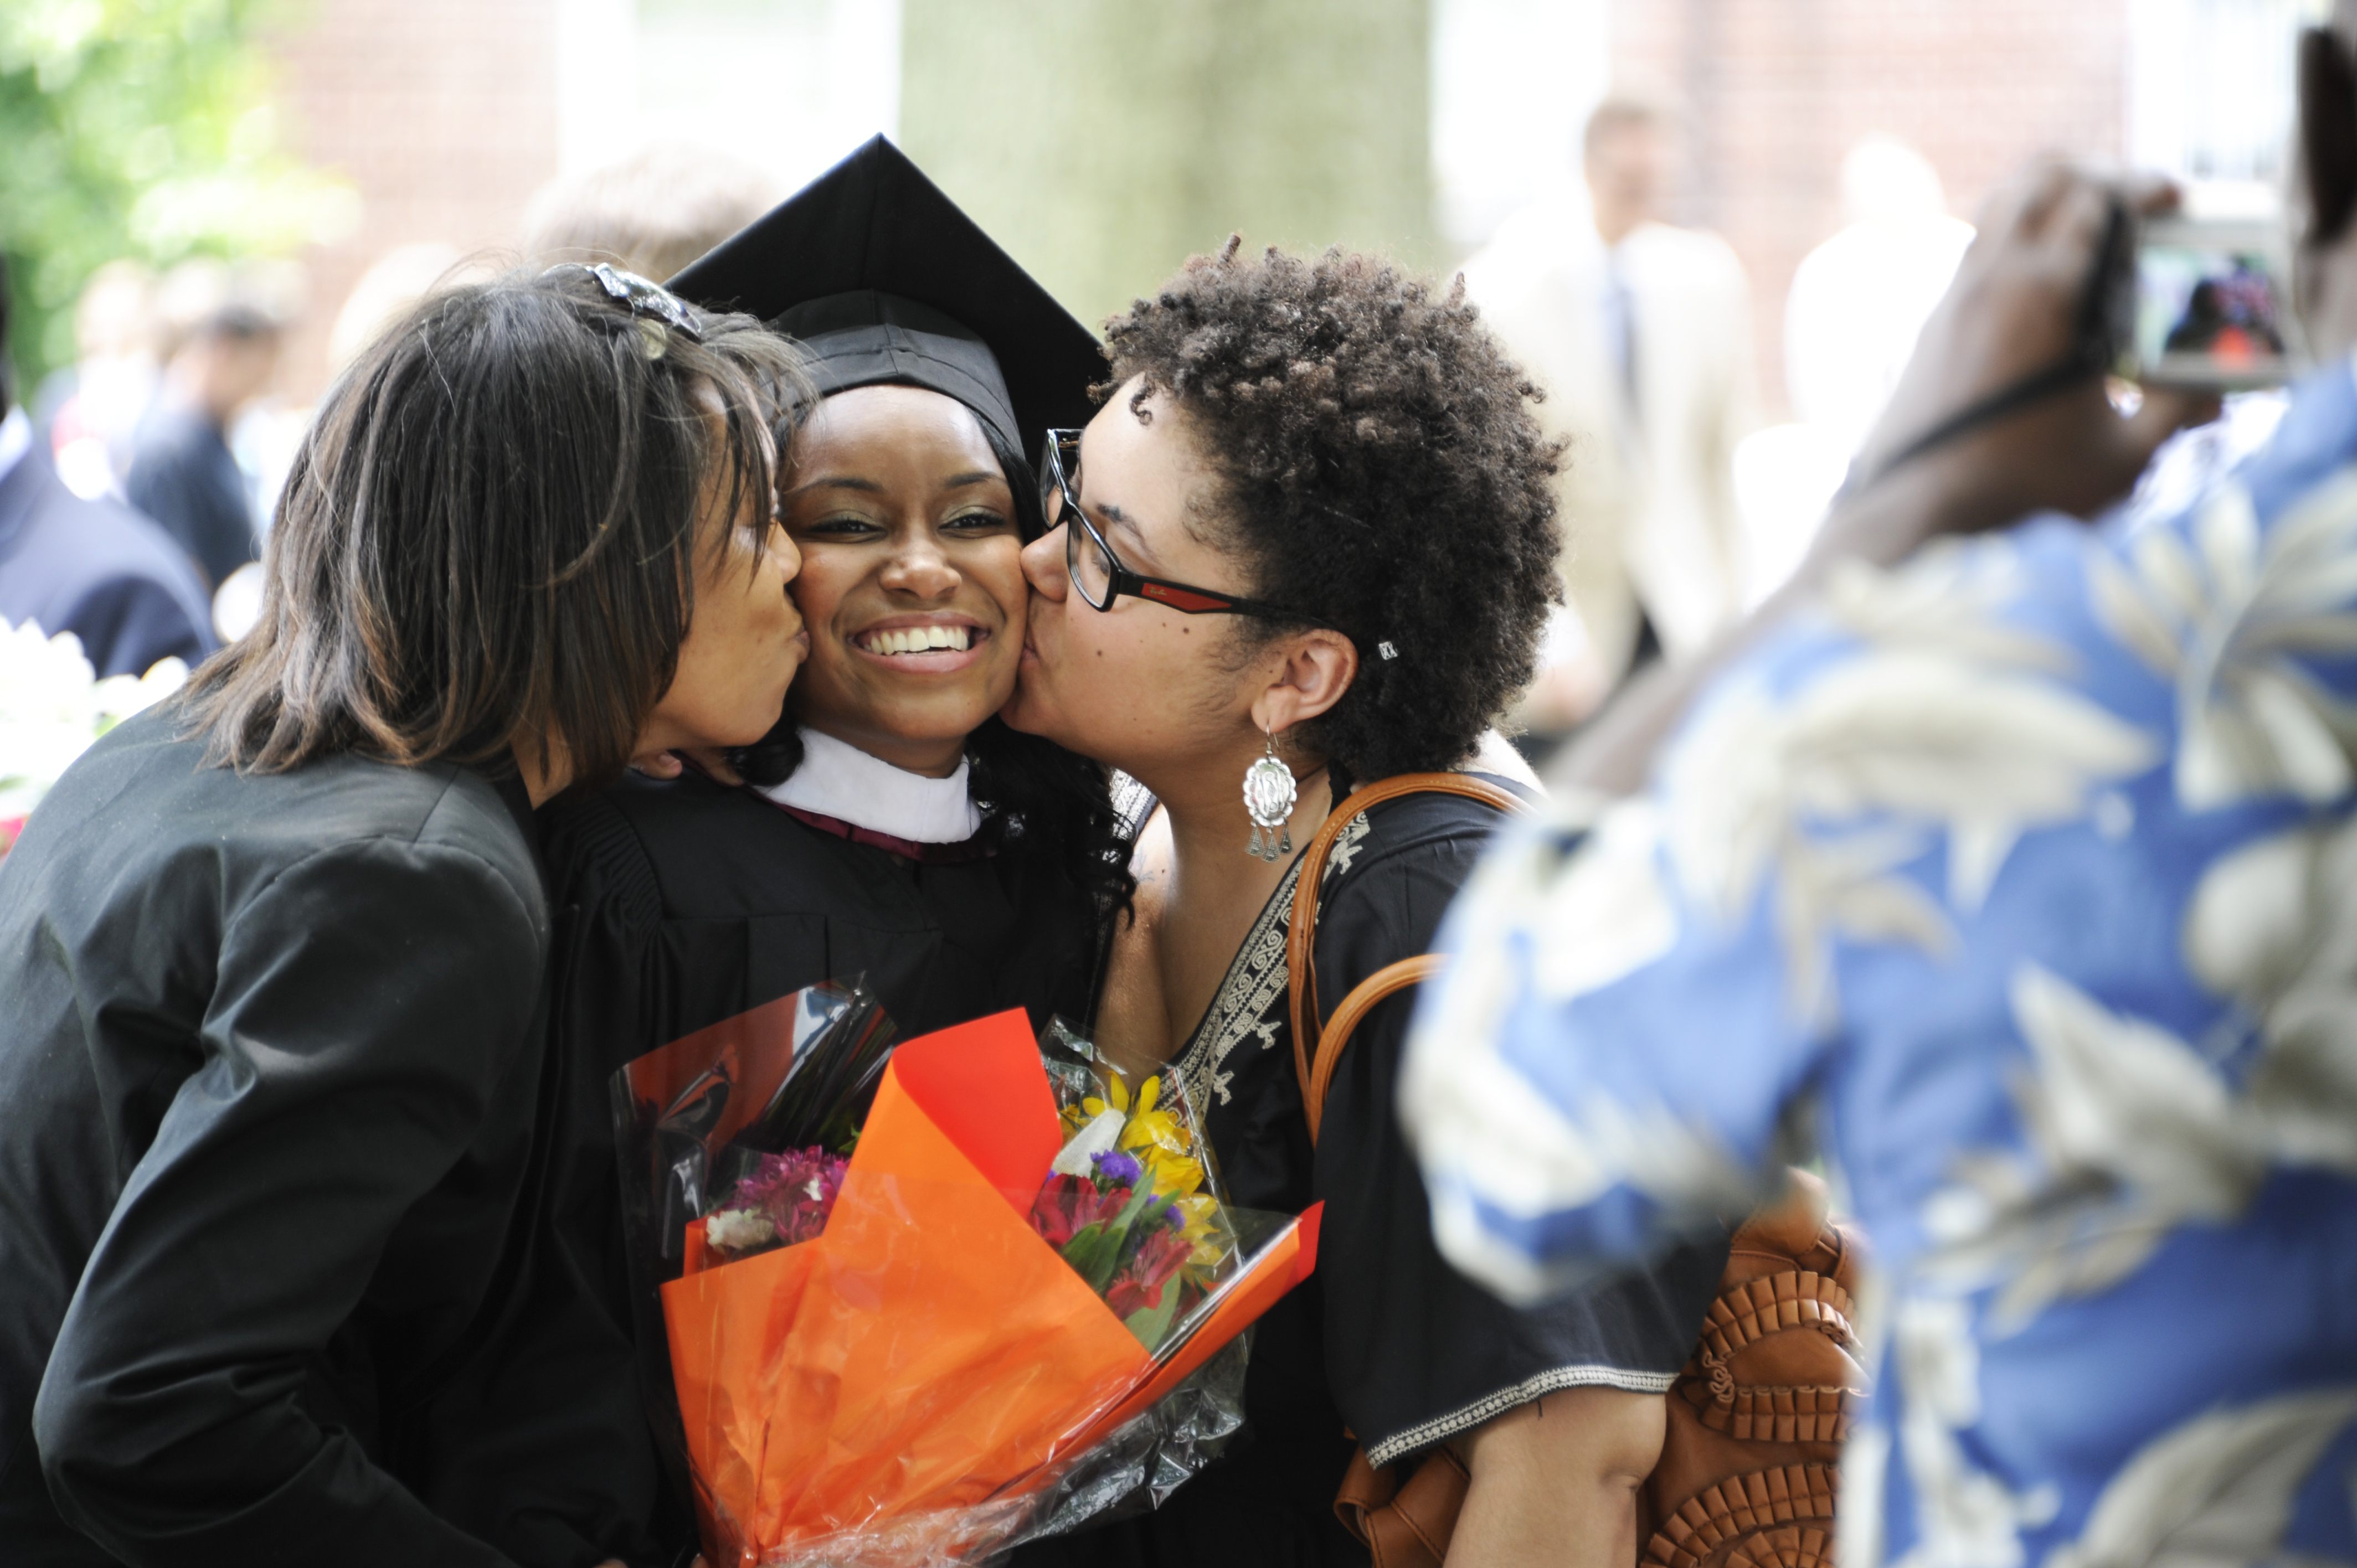 WC graduate being embraced by family in celebration  